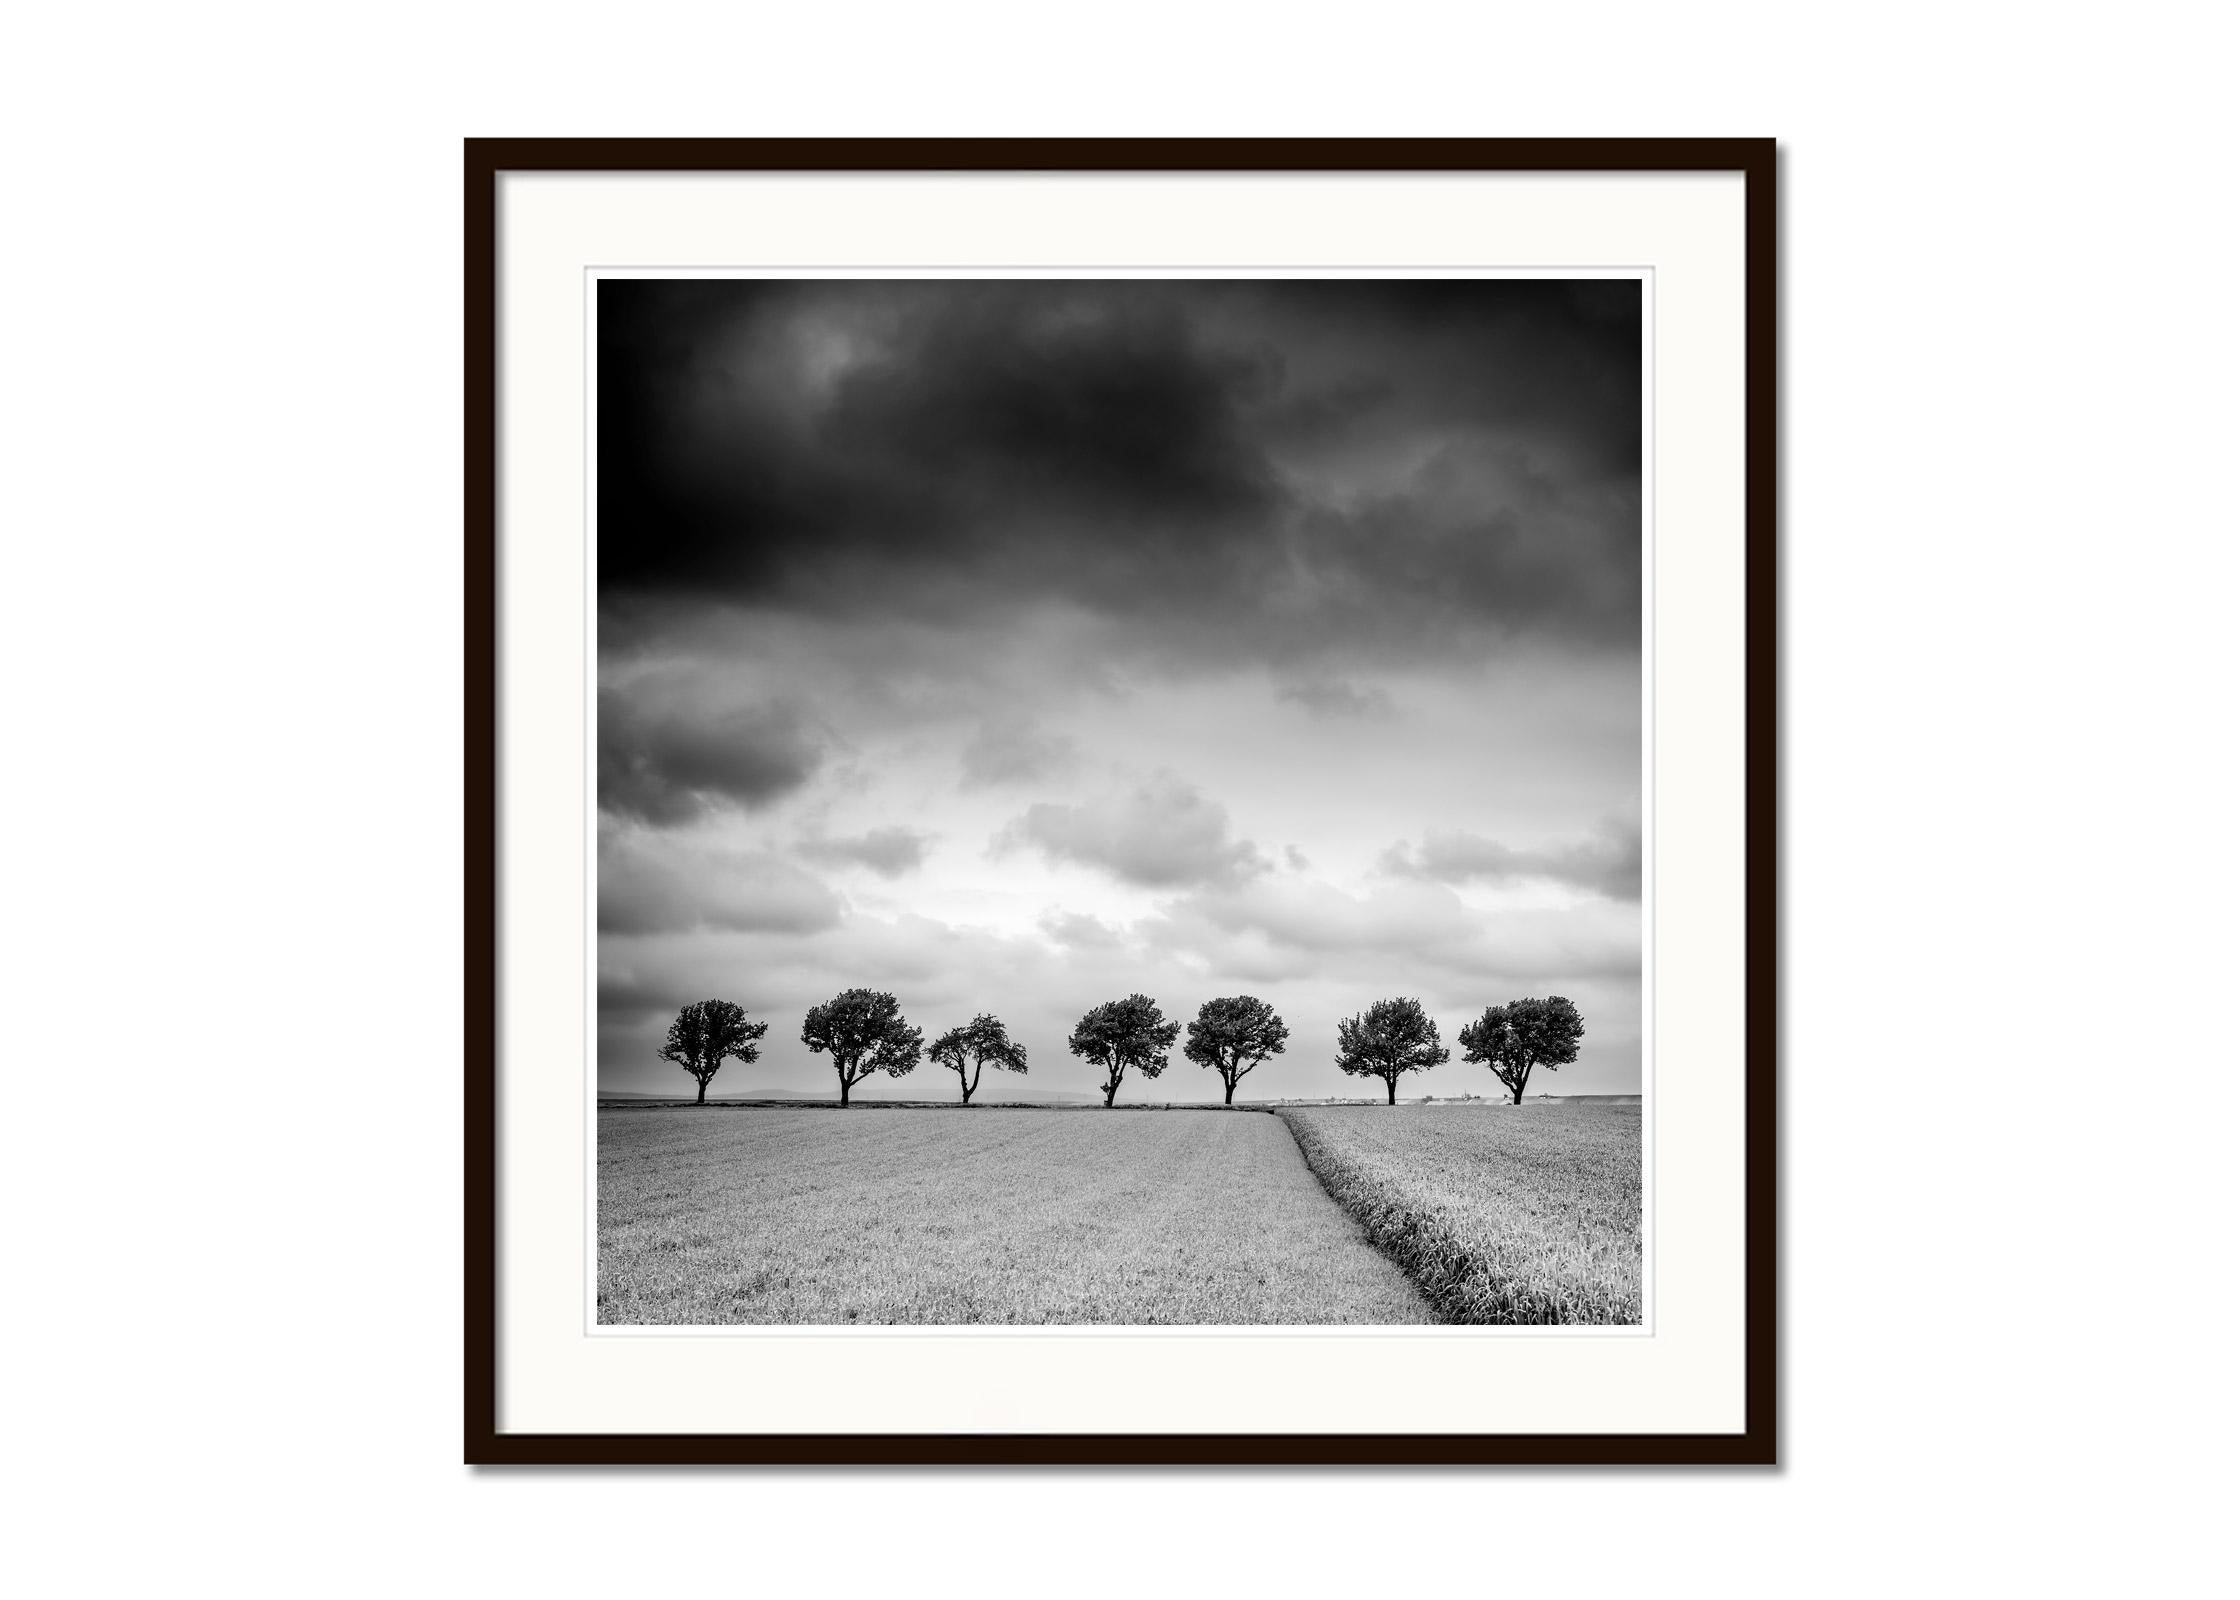 Trees on the edge of Field, cloudy, storm, black white art landscape photography - Contemporary Print by Gerald Berghammer